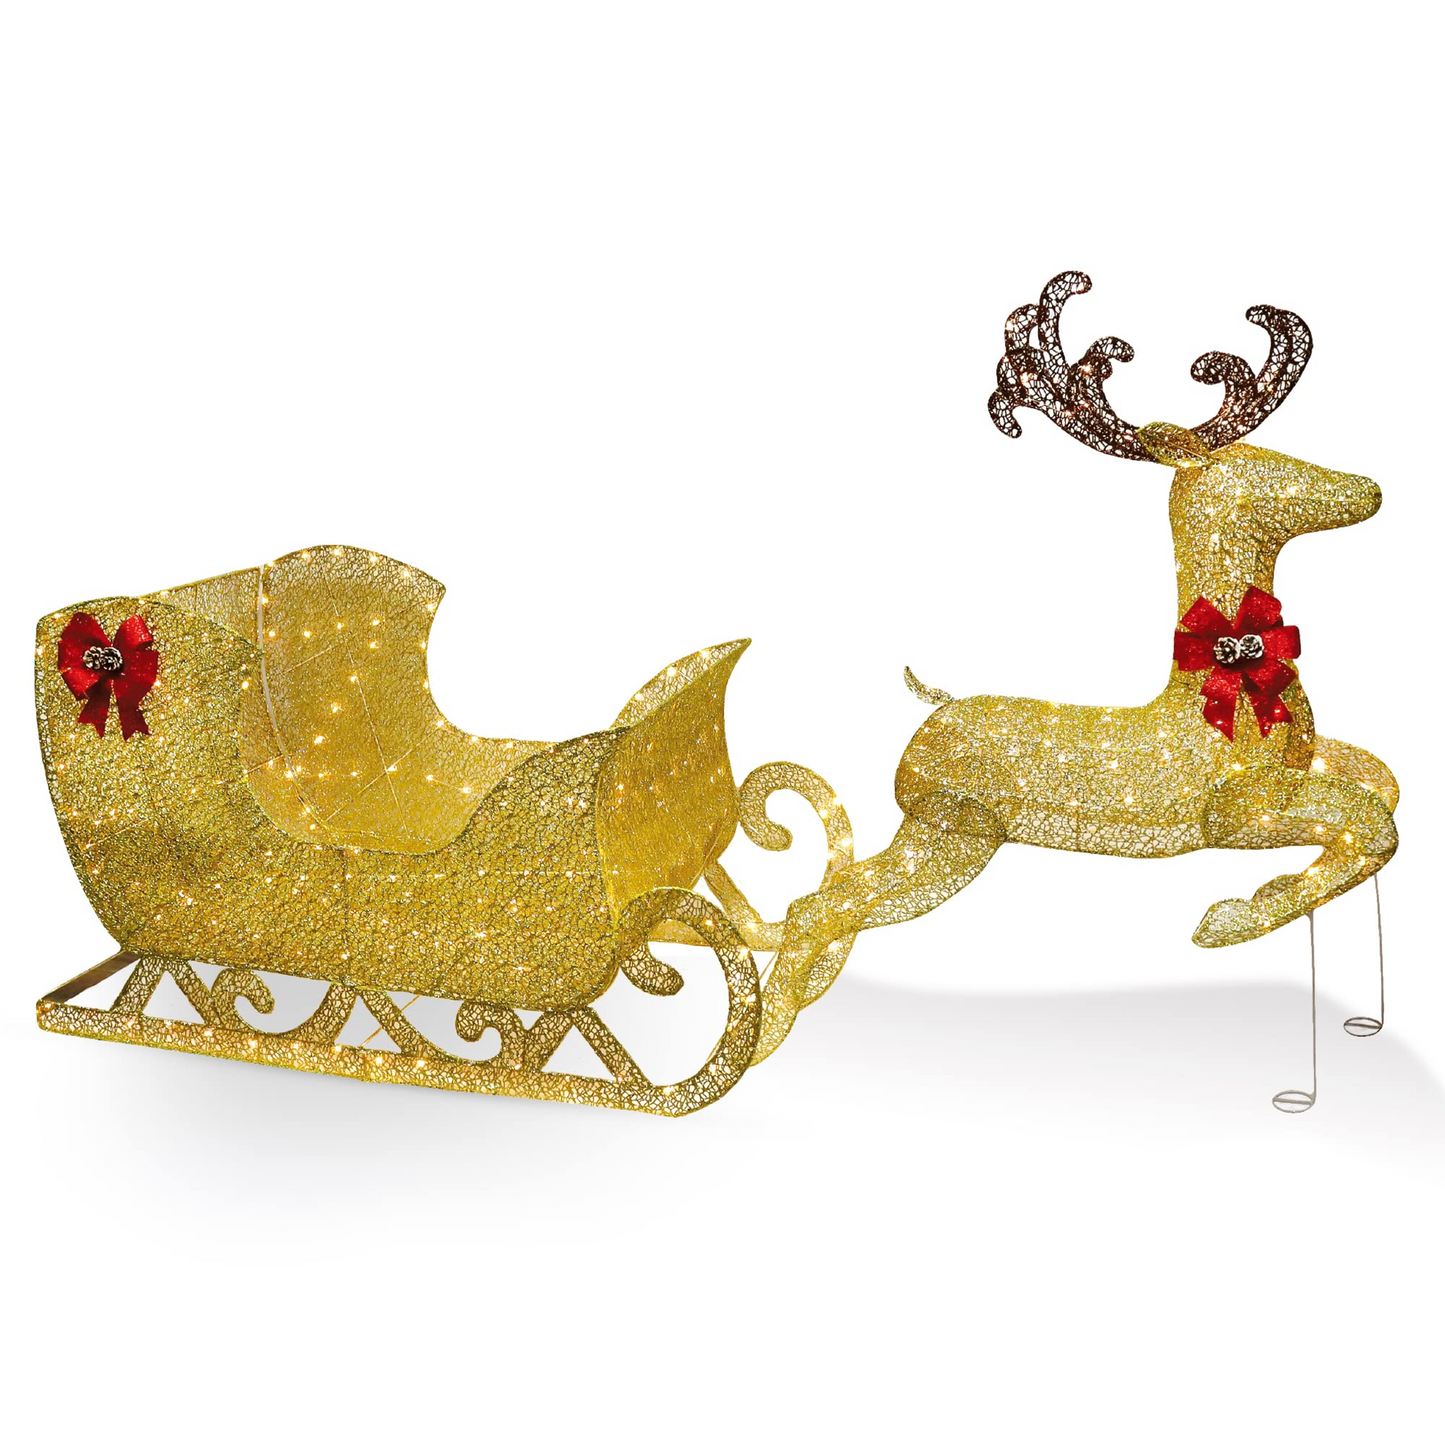 2 Pcs LED Yard Lights - Fabric 5ft Reindeer and 3ft Sleigh (Gold)